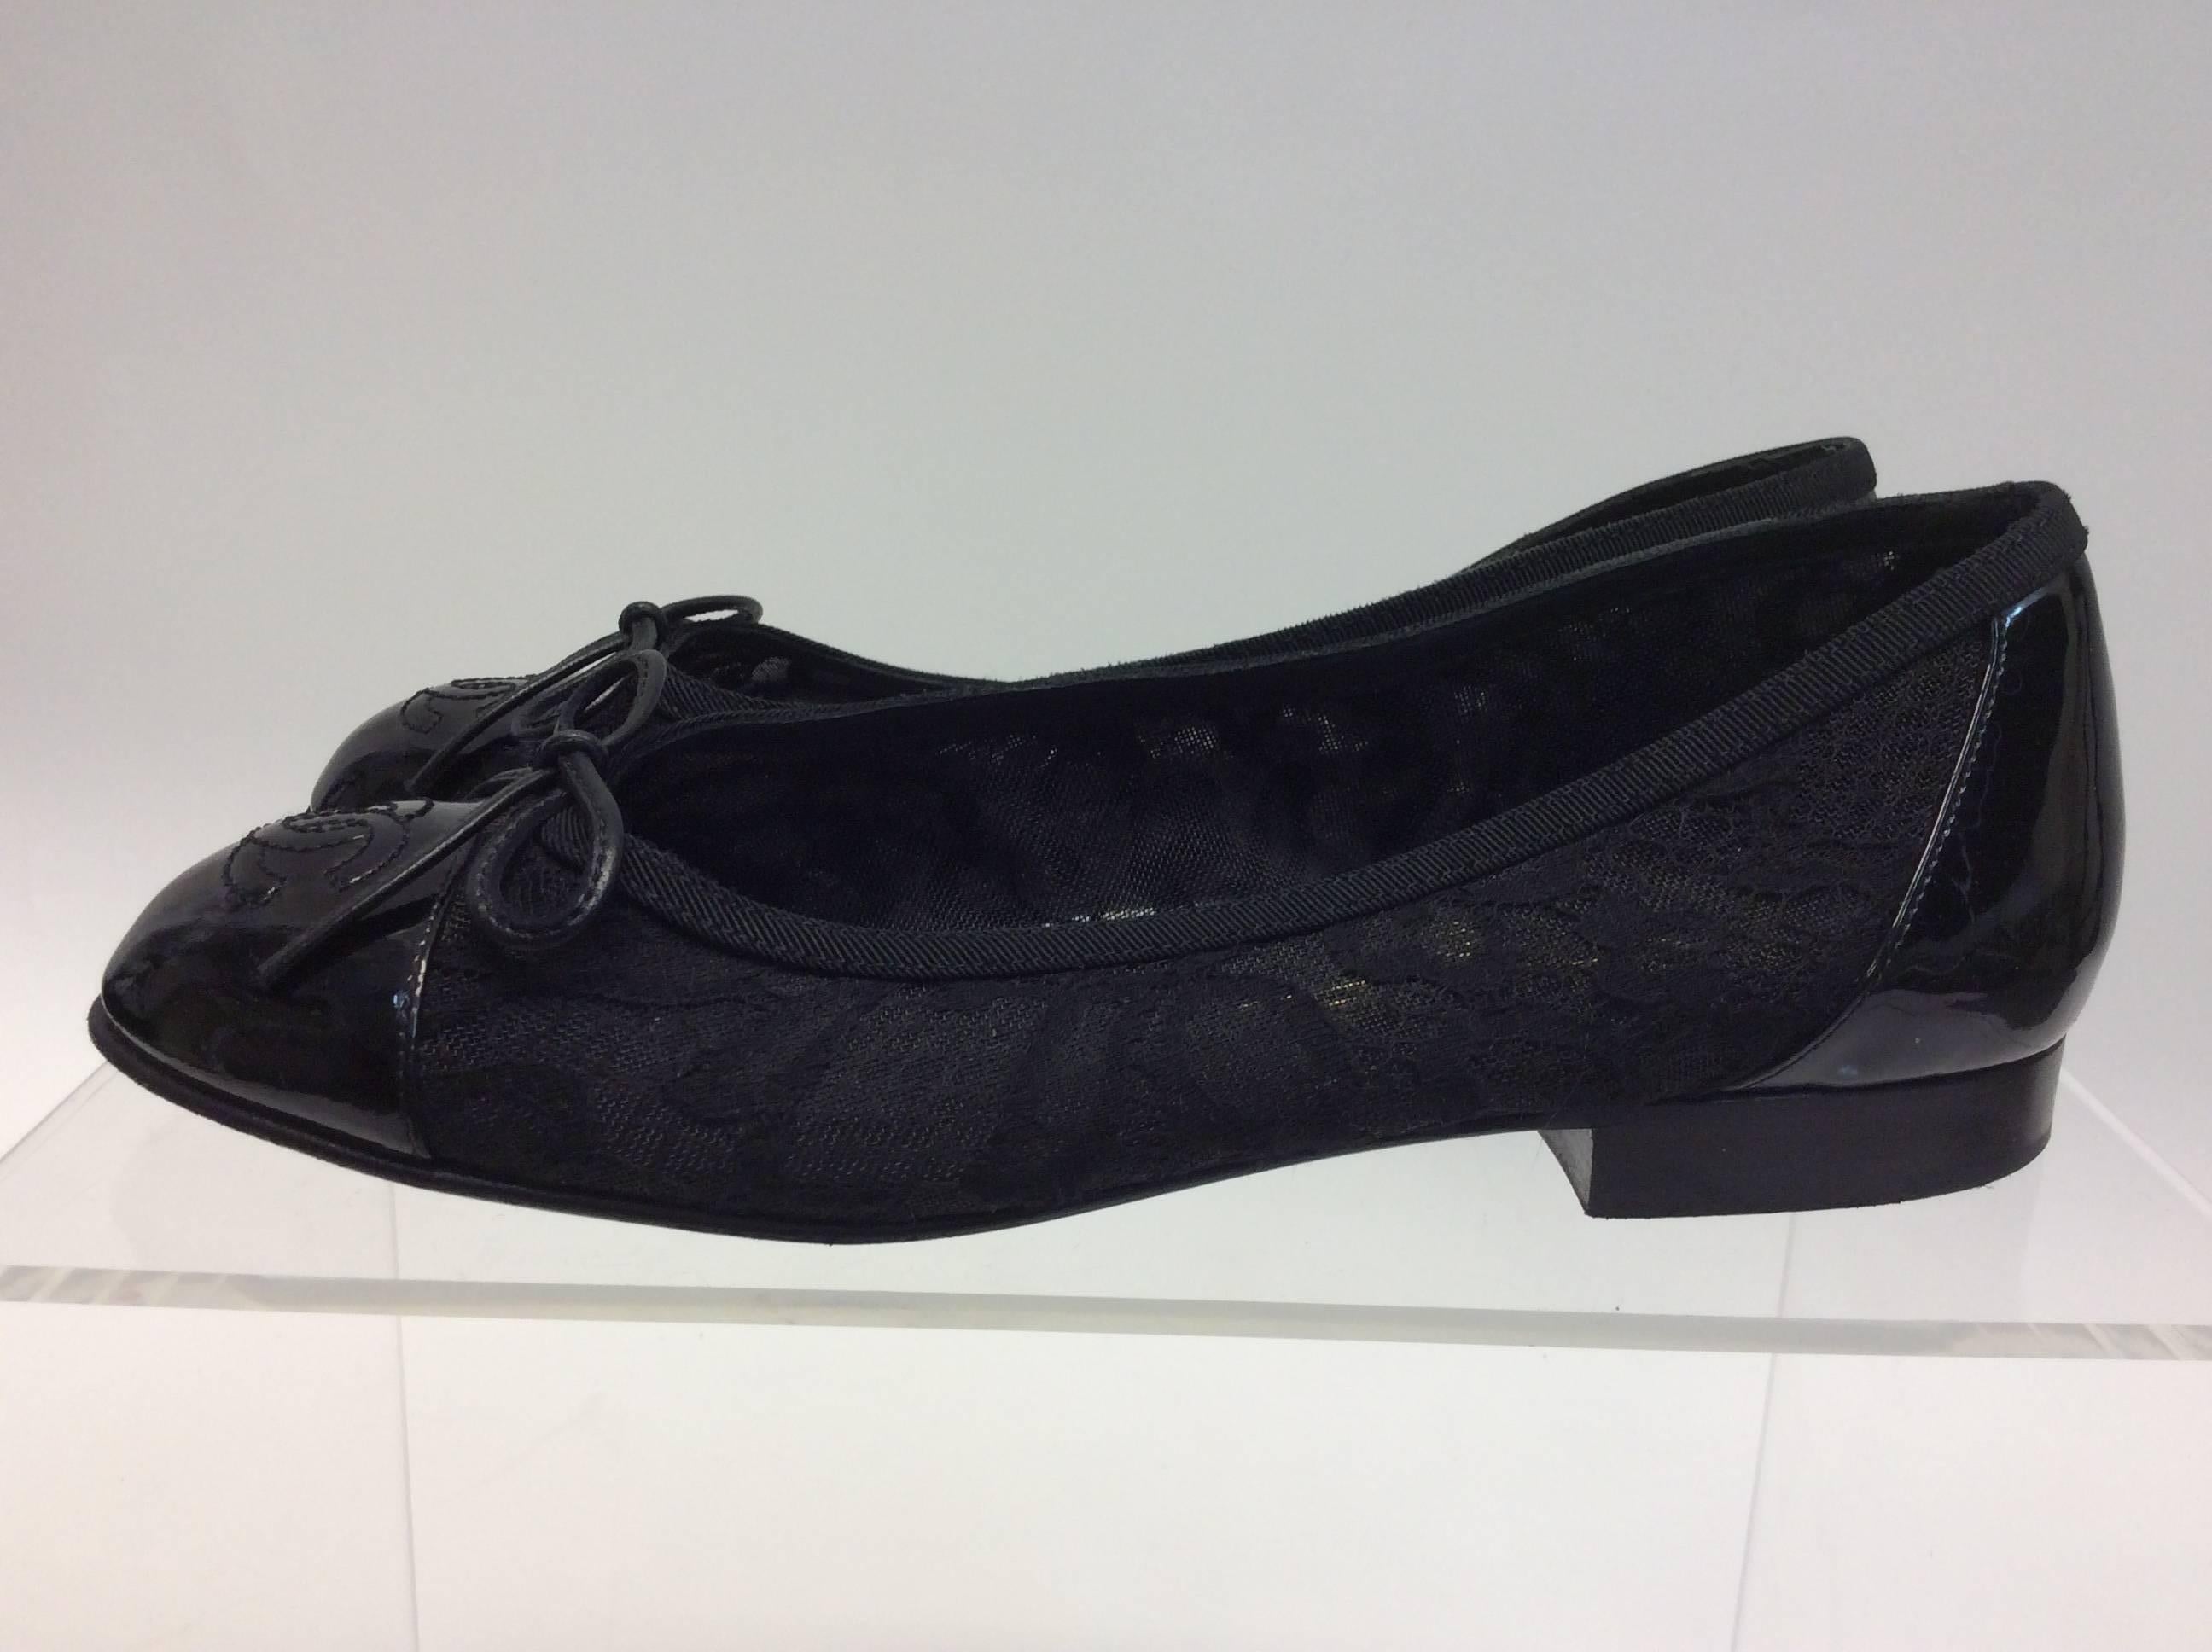 Chanel Black Lace Flats
$299
Made in Italy
Size 35